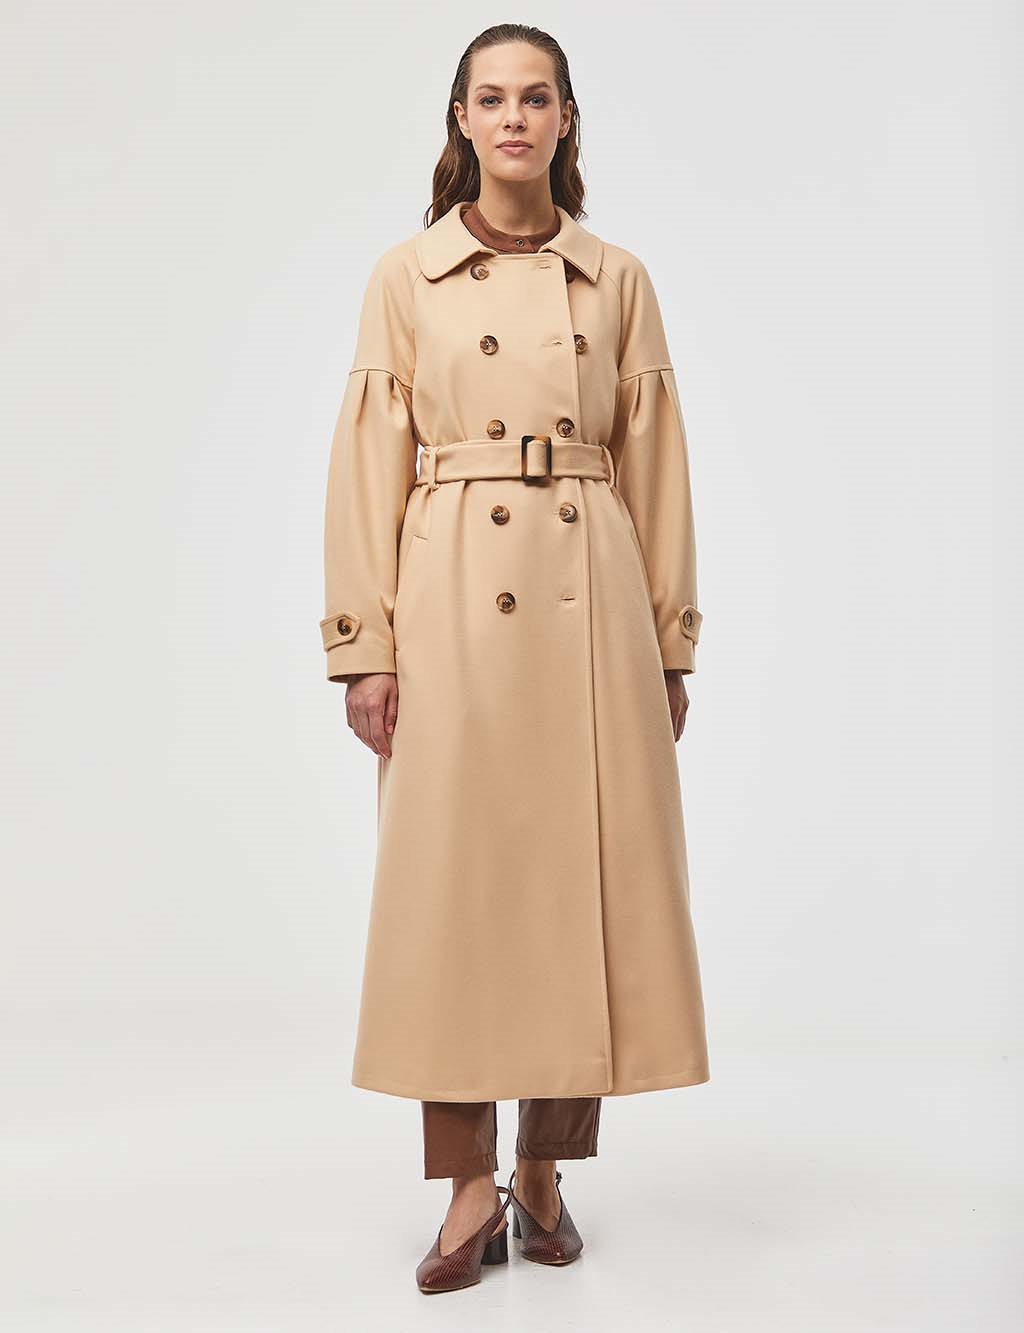 Bone Buttoned Double Breasted Coat Beige